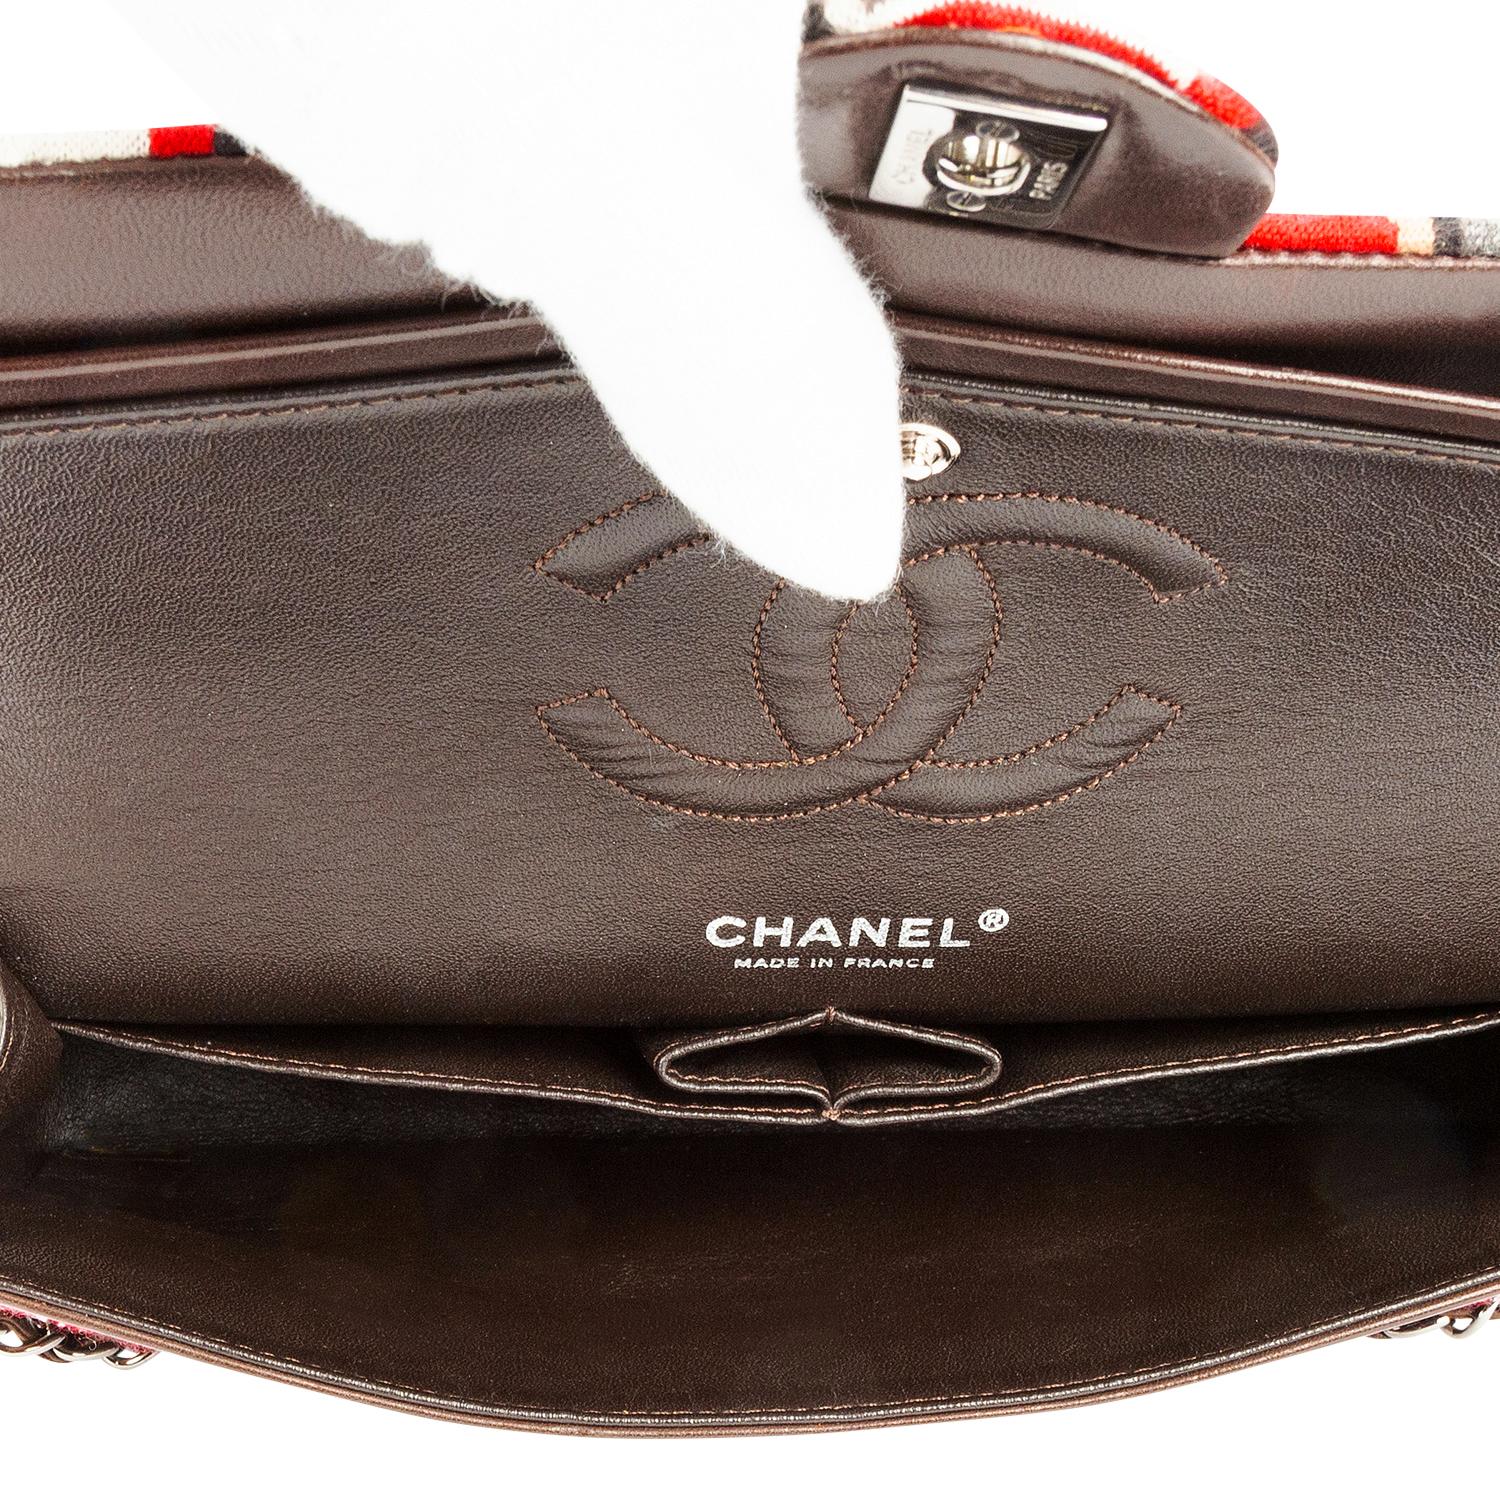 Chanel Limited Edition 2006 Cambon Patchwork Double Flap Bag For Sale 1